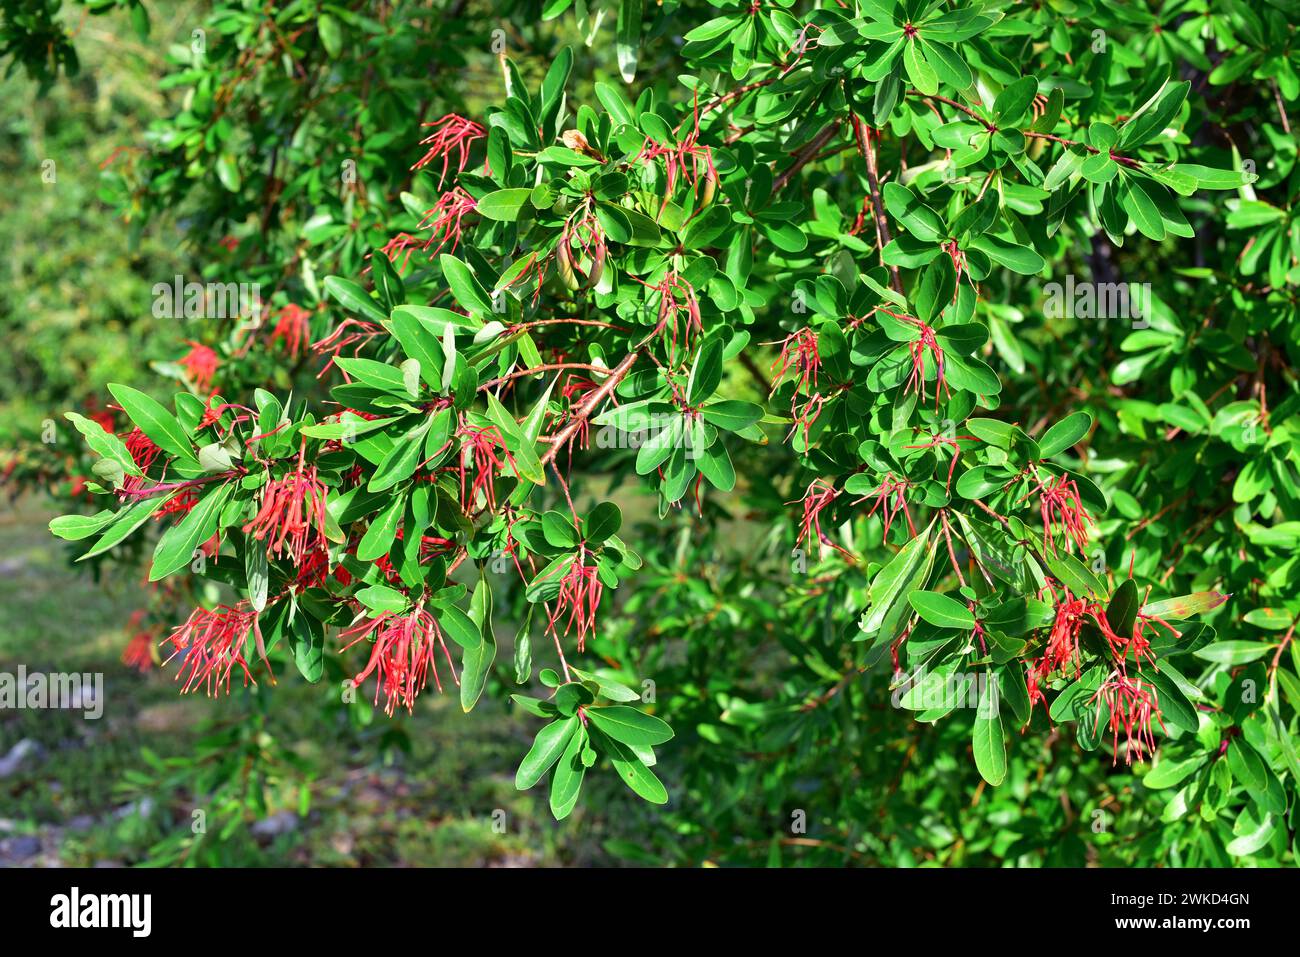 Notro or Chilean firetree (Embothrium coccineum) is a small evergreen tree native to temperate regions of Chile and Argentina. Flowers, fruits and lea Stock Photo